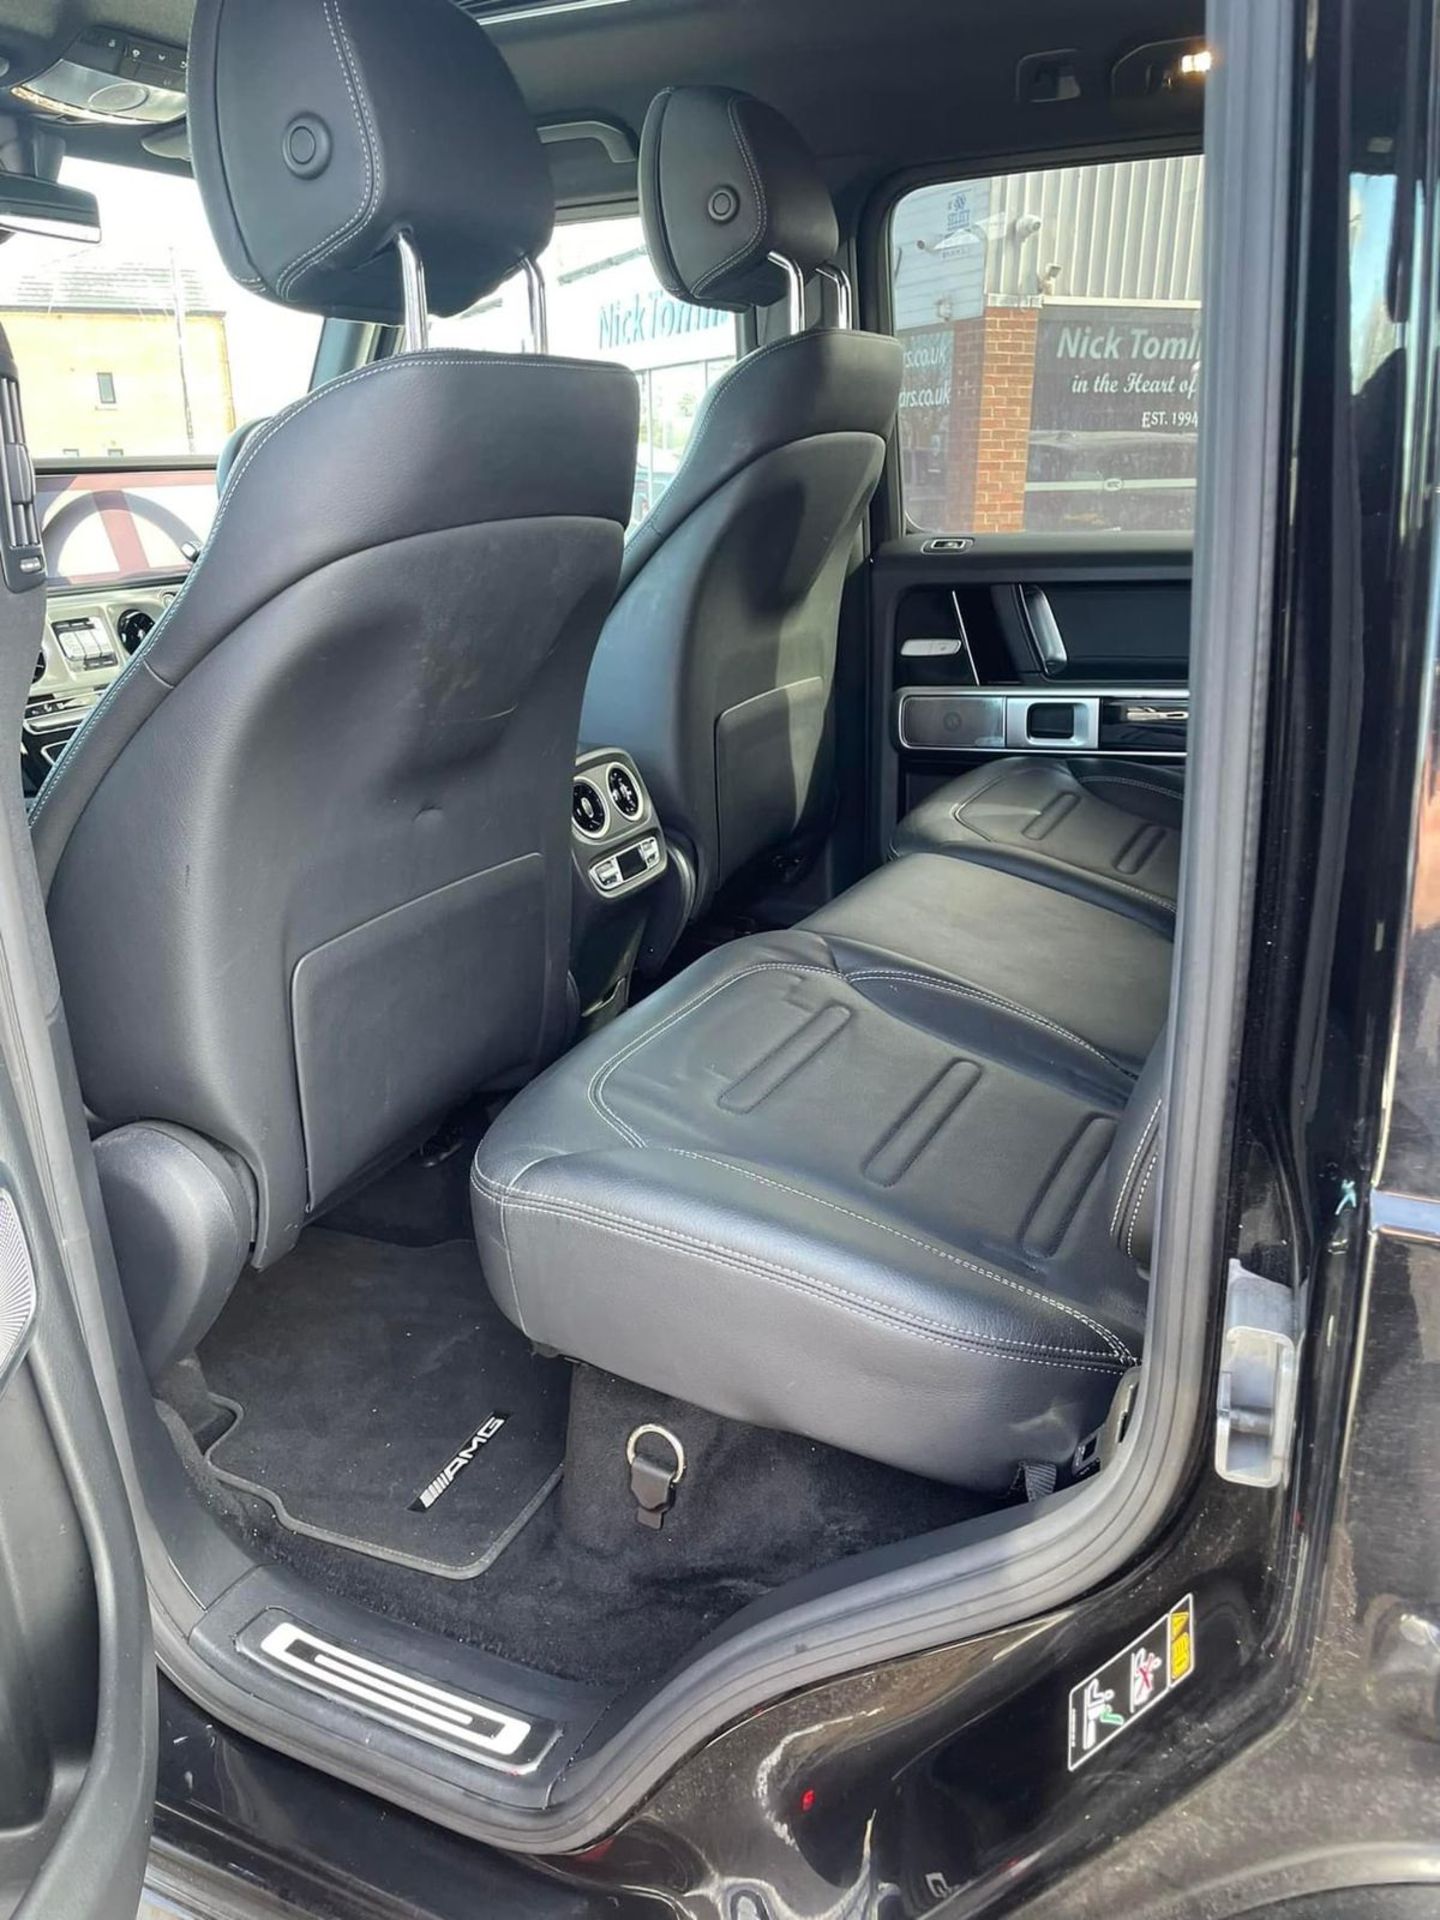 2019/19 REG MERCEDES-BENZ G350 AMG LINE PREMIUM D 4M AUTOMATIC RARE 7 SEAT, SHOWING 0 FORMER KEEPERS - Image 7 of 9